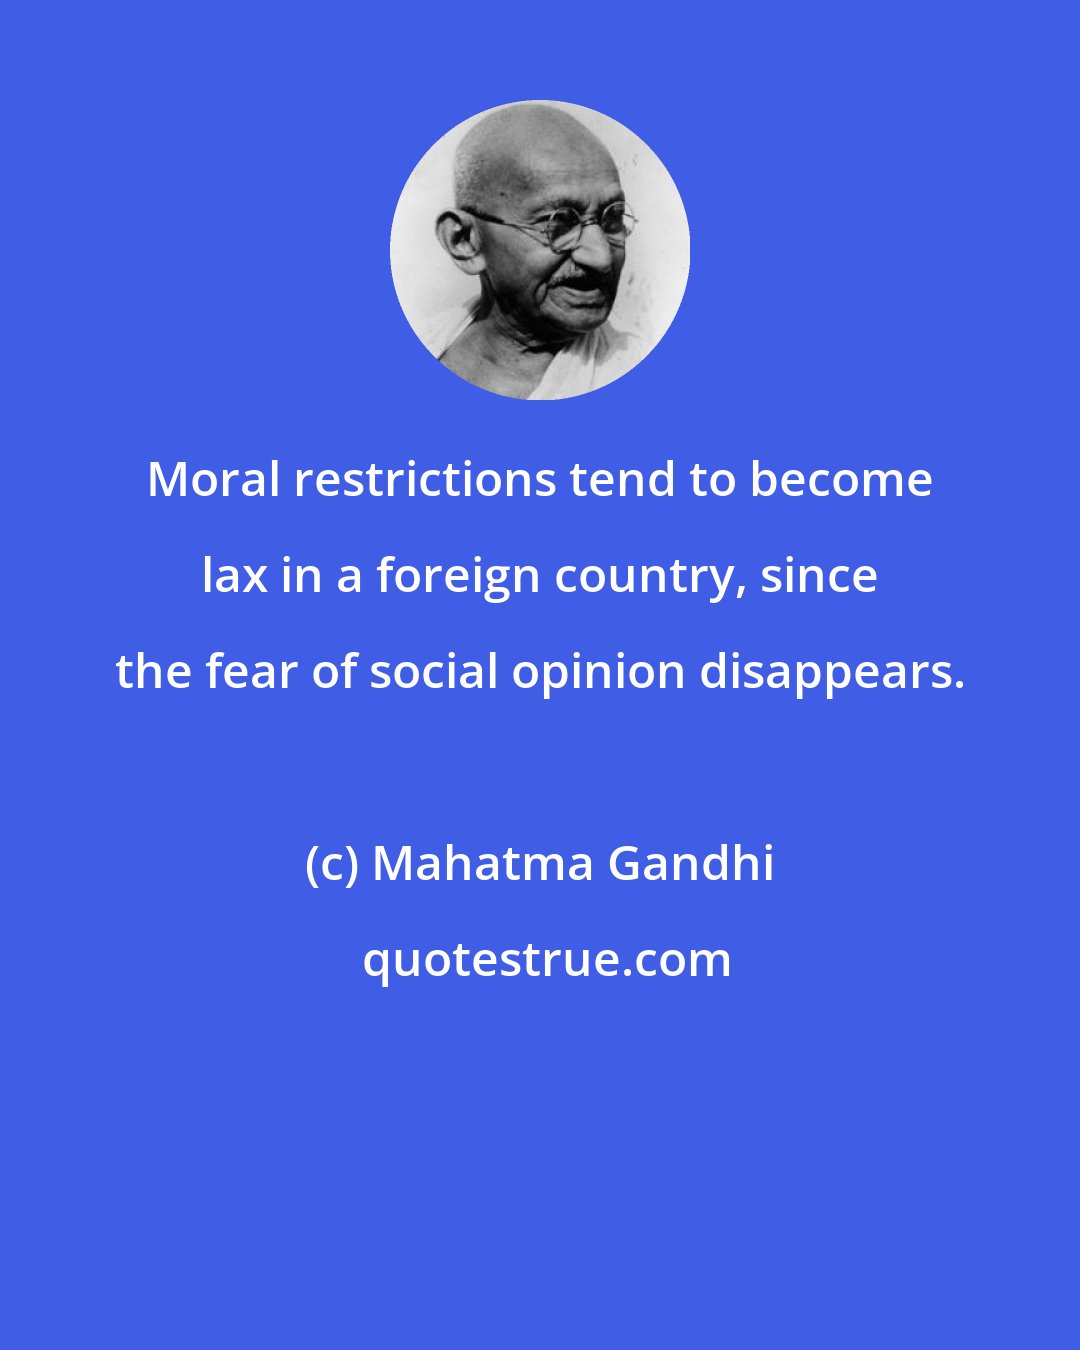 Mahatma Gandhi: Moral restrictions tend to become lax in a foreign country, since the fear of social opinion disappears.